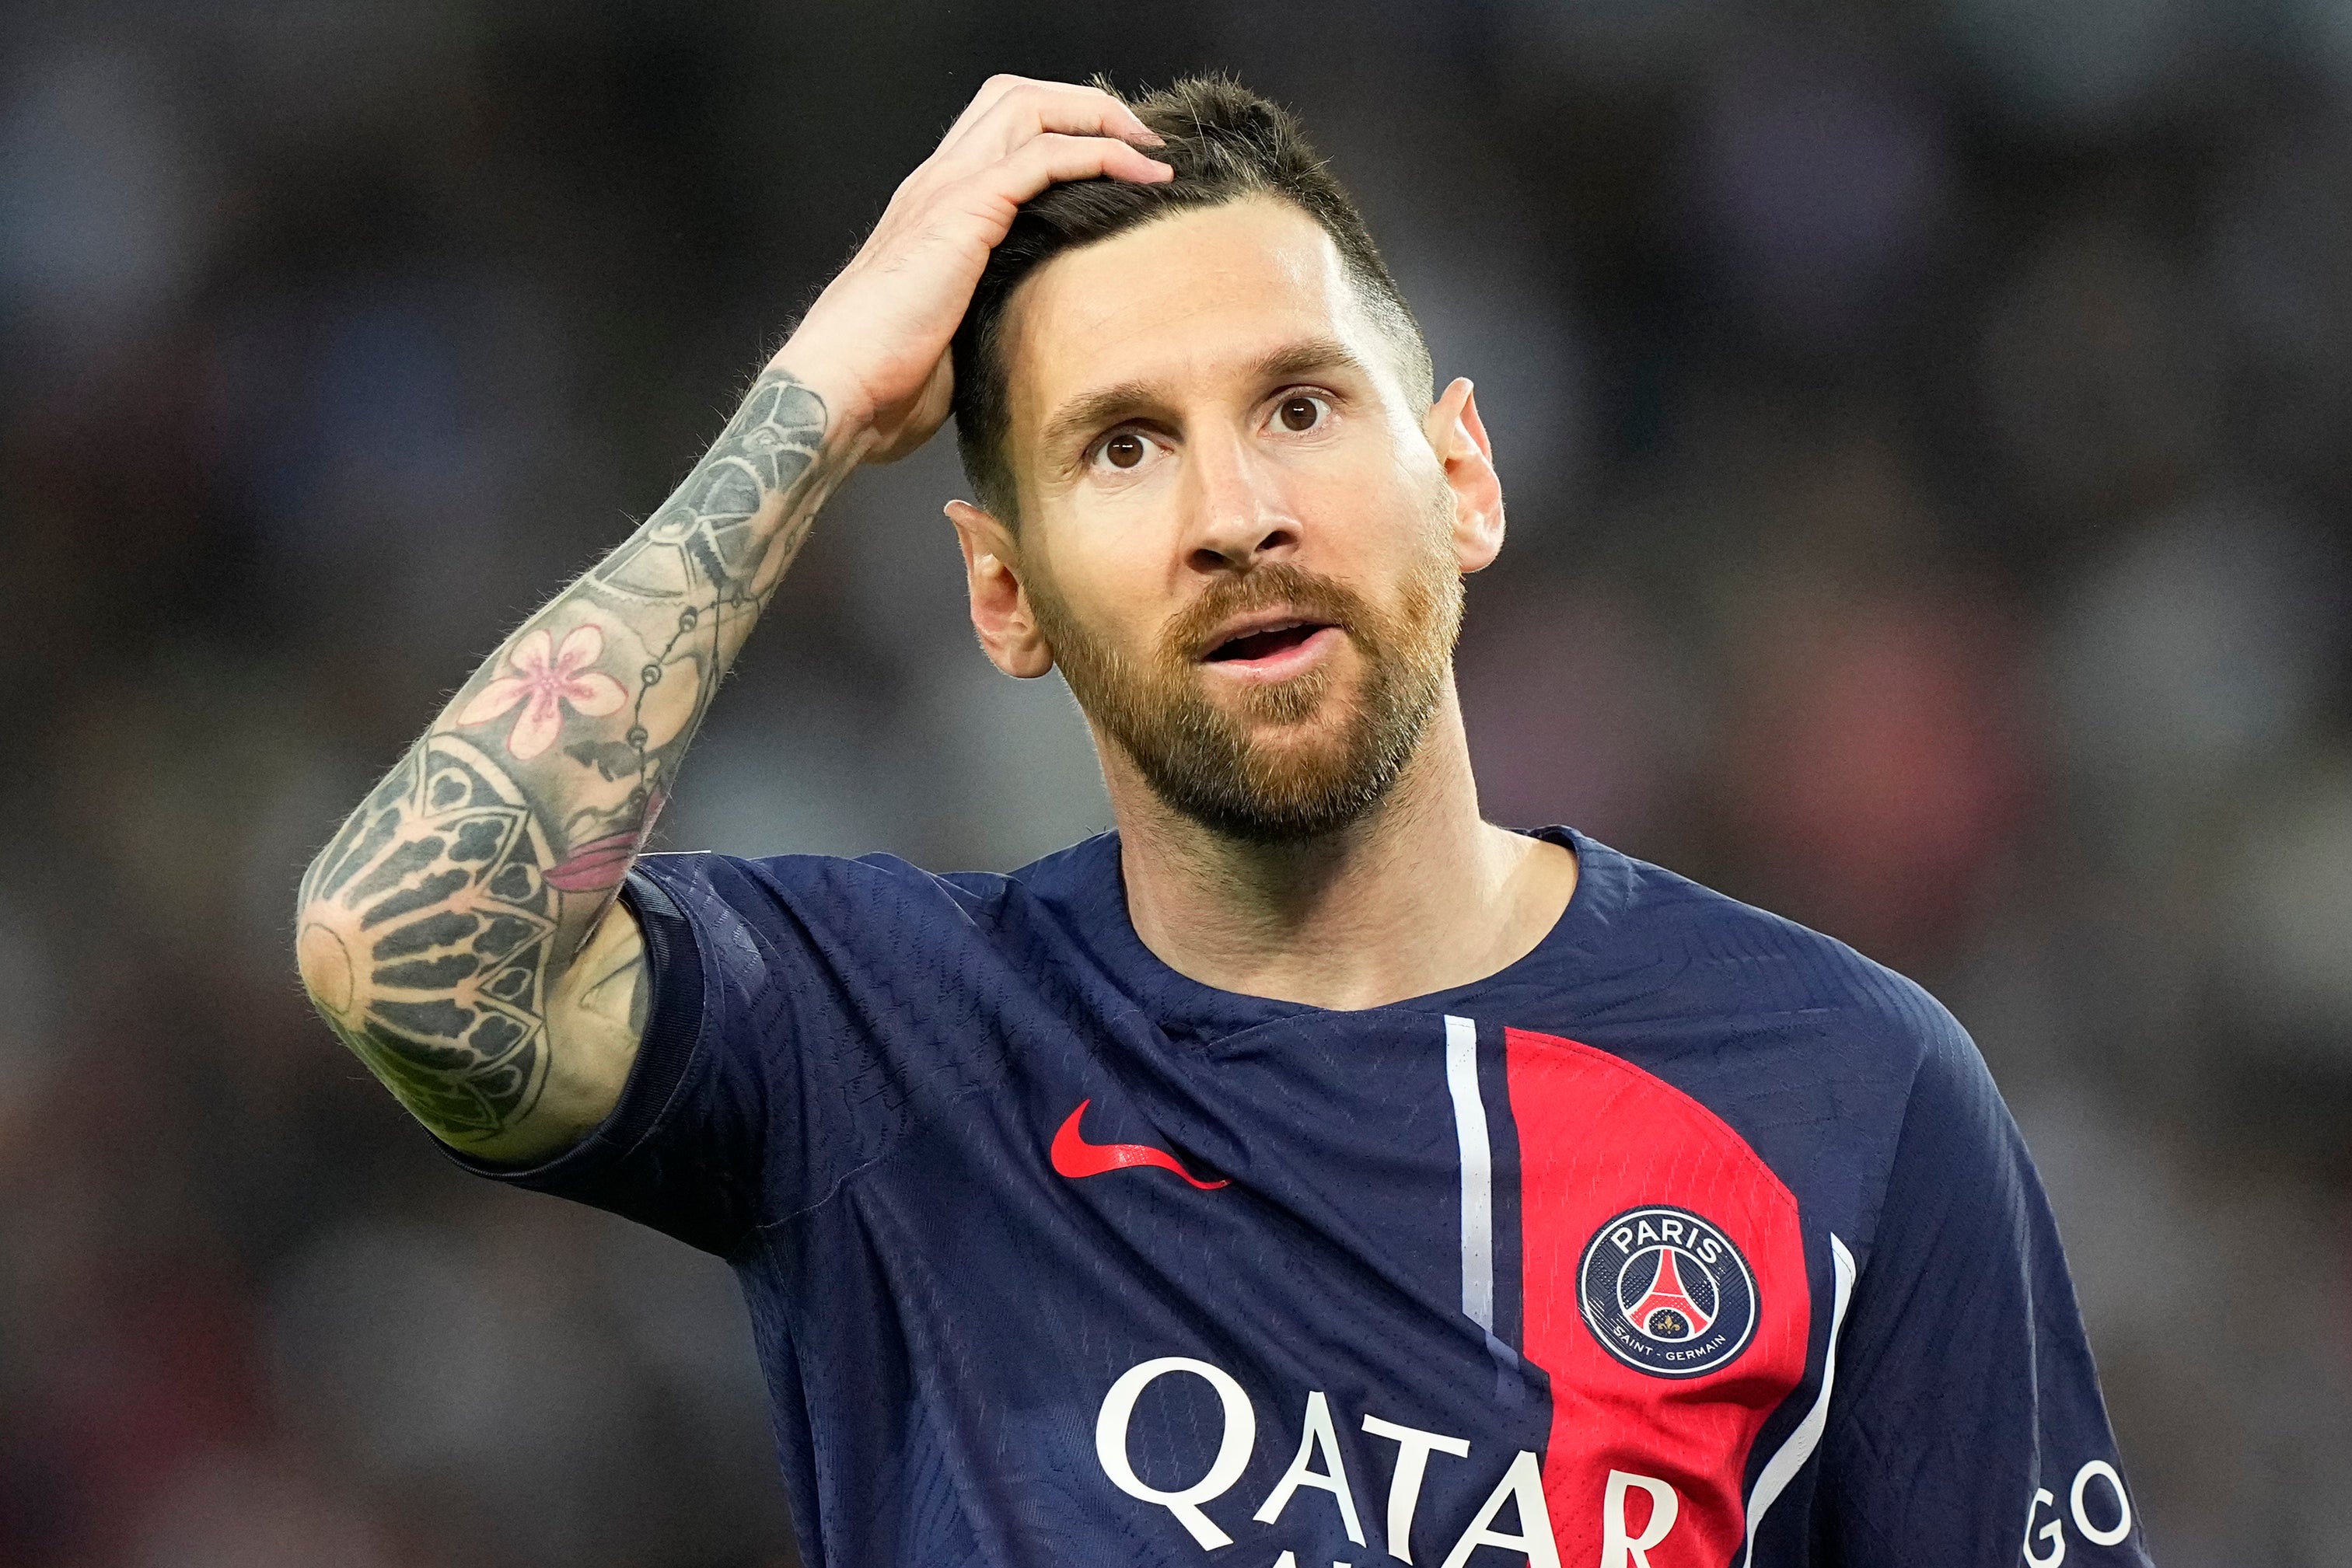 Lionel Messi’s time in Paris failed to live up to expectations